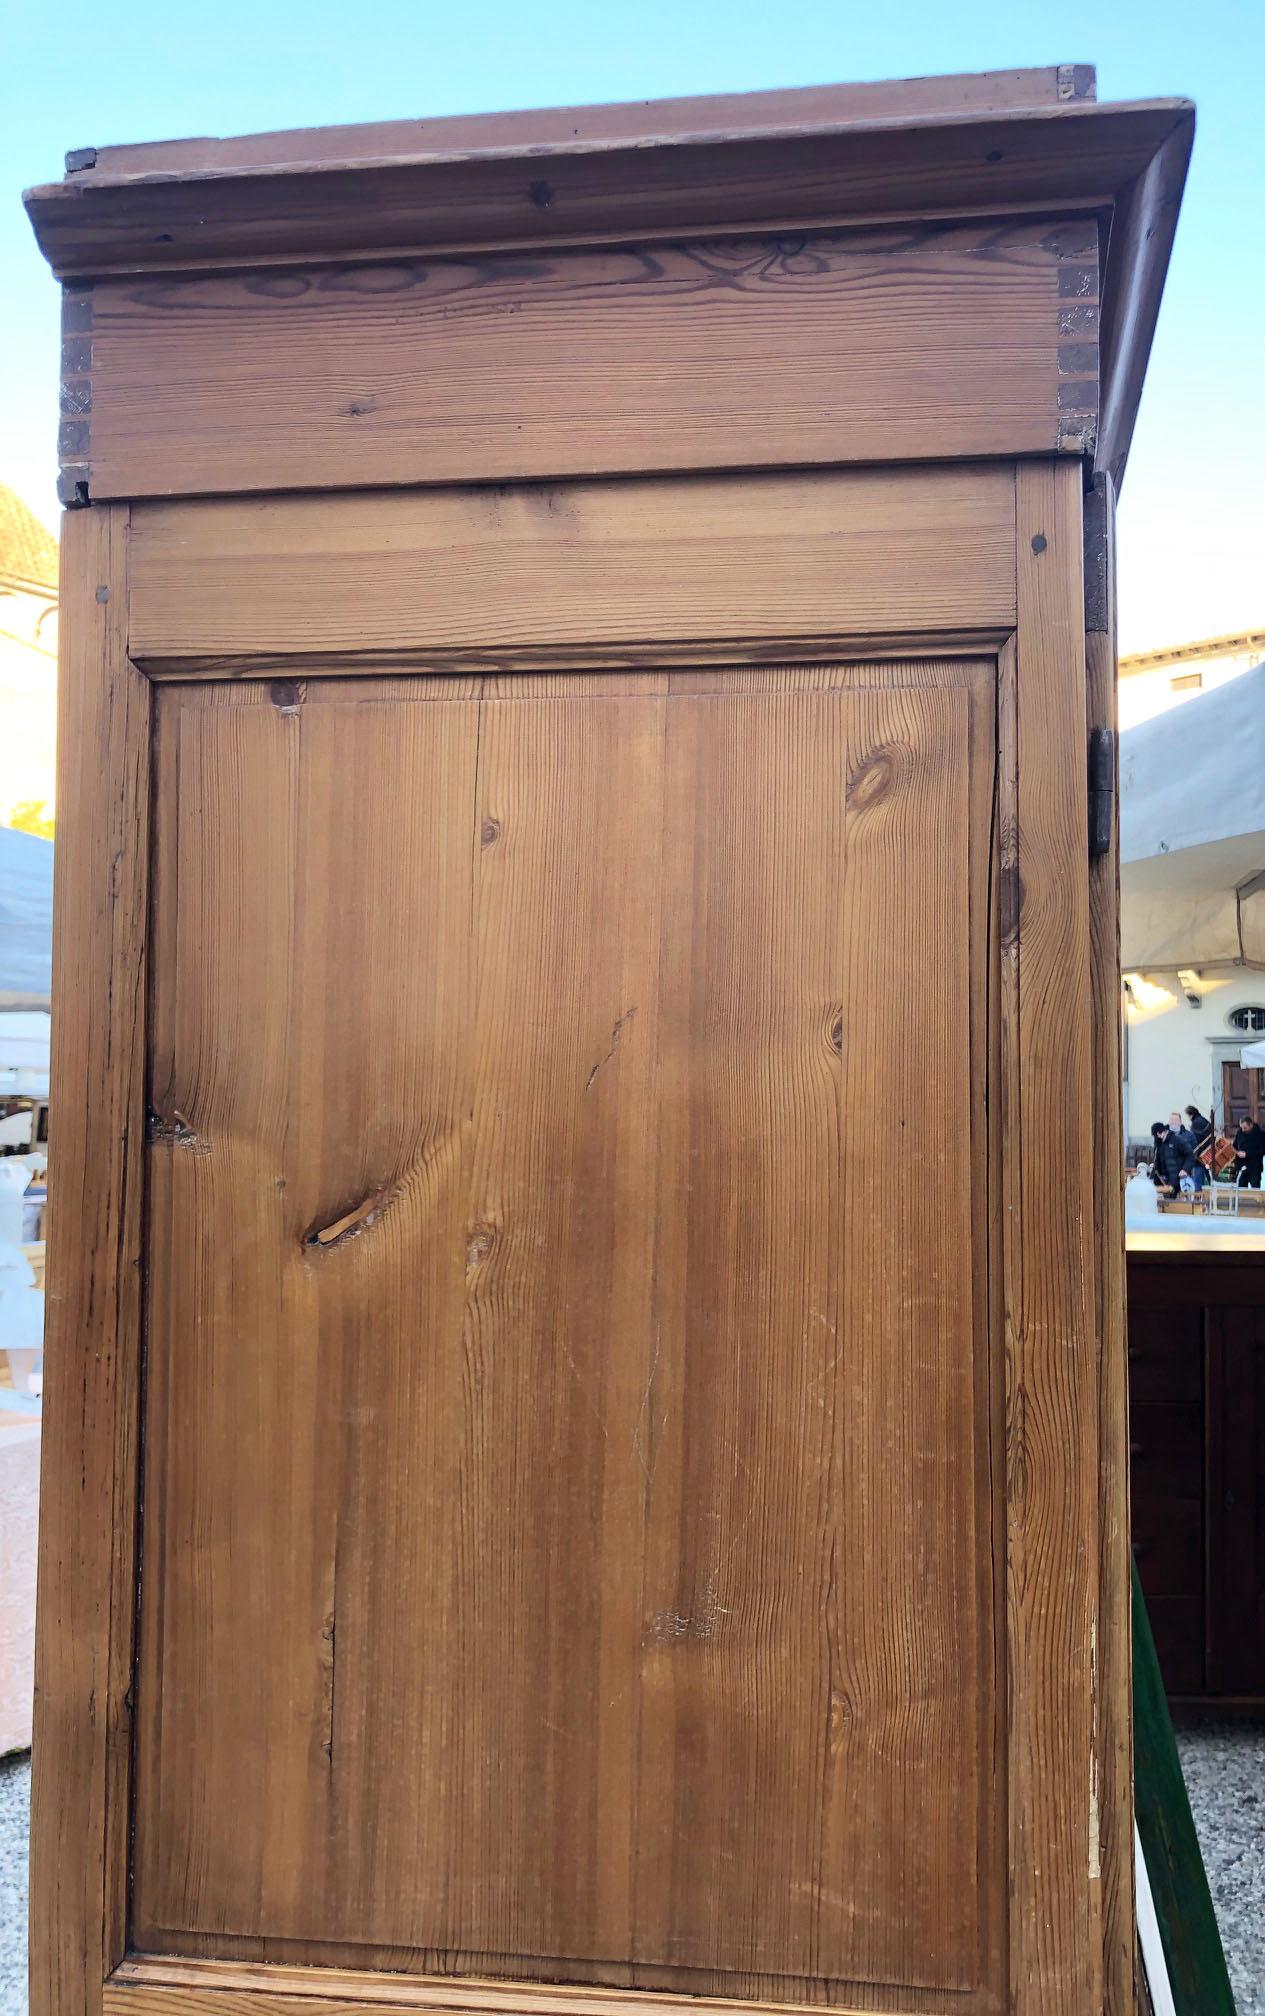 Italian 1880s Wardrobe Tuscan Fir with Two Doors Natural Color One Drawer